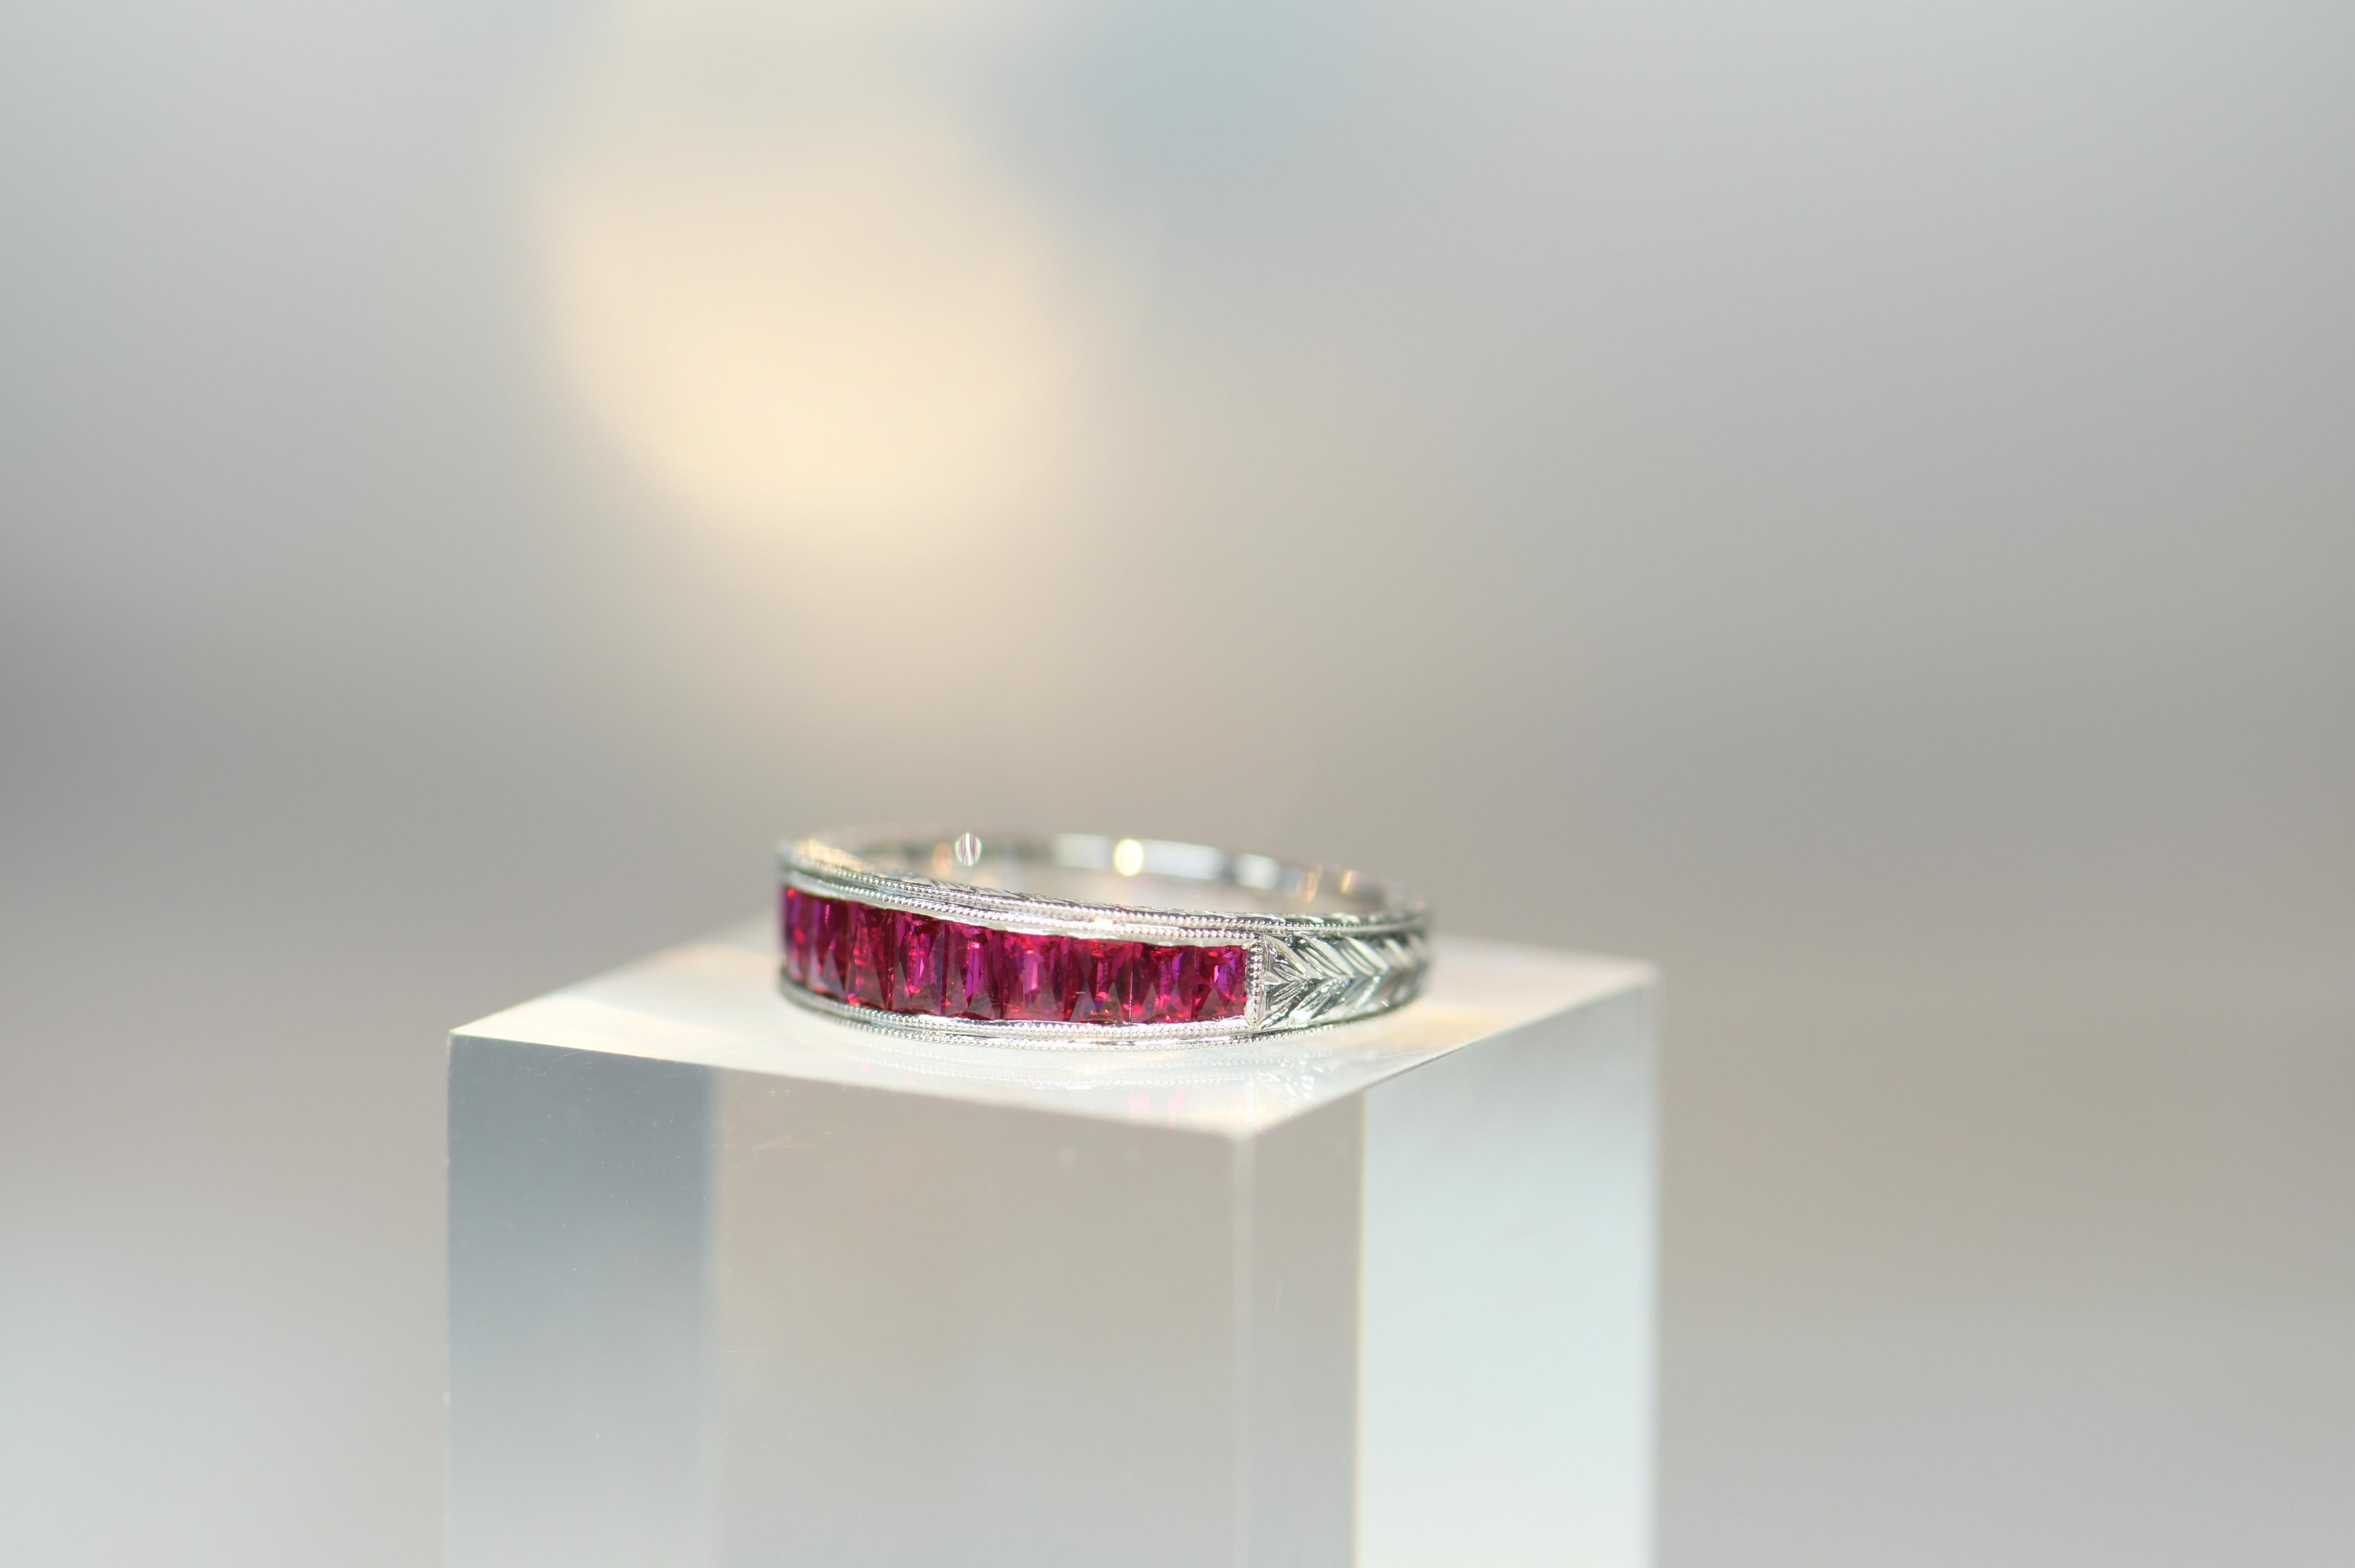 A lovely 18ct gold ring that has been set with well matched bright red natural ruby . The gold engrave work on the band is very fine and elegant.  This ring got an impressive look and very well matched stones. 

Weight: 4.93g
Size: N